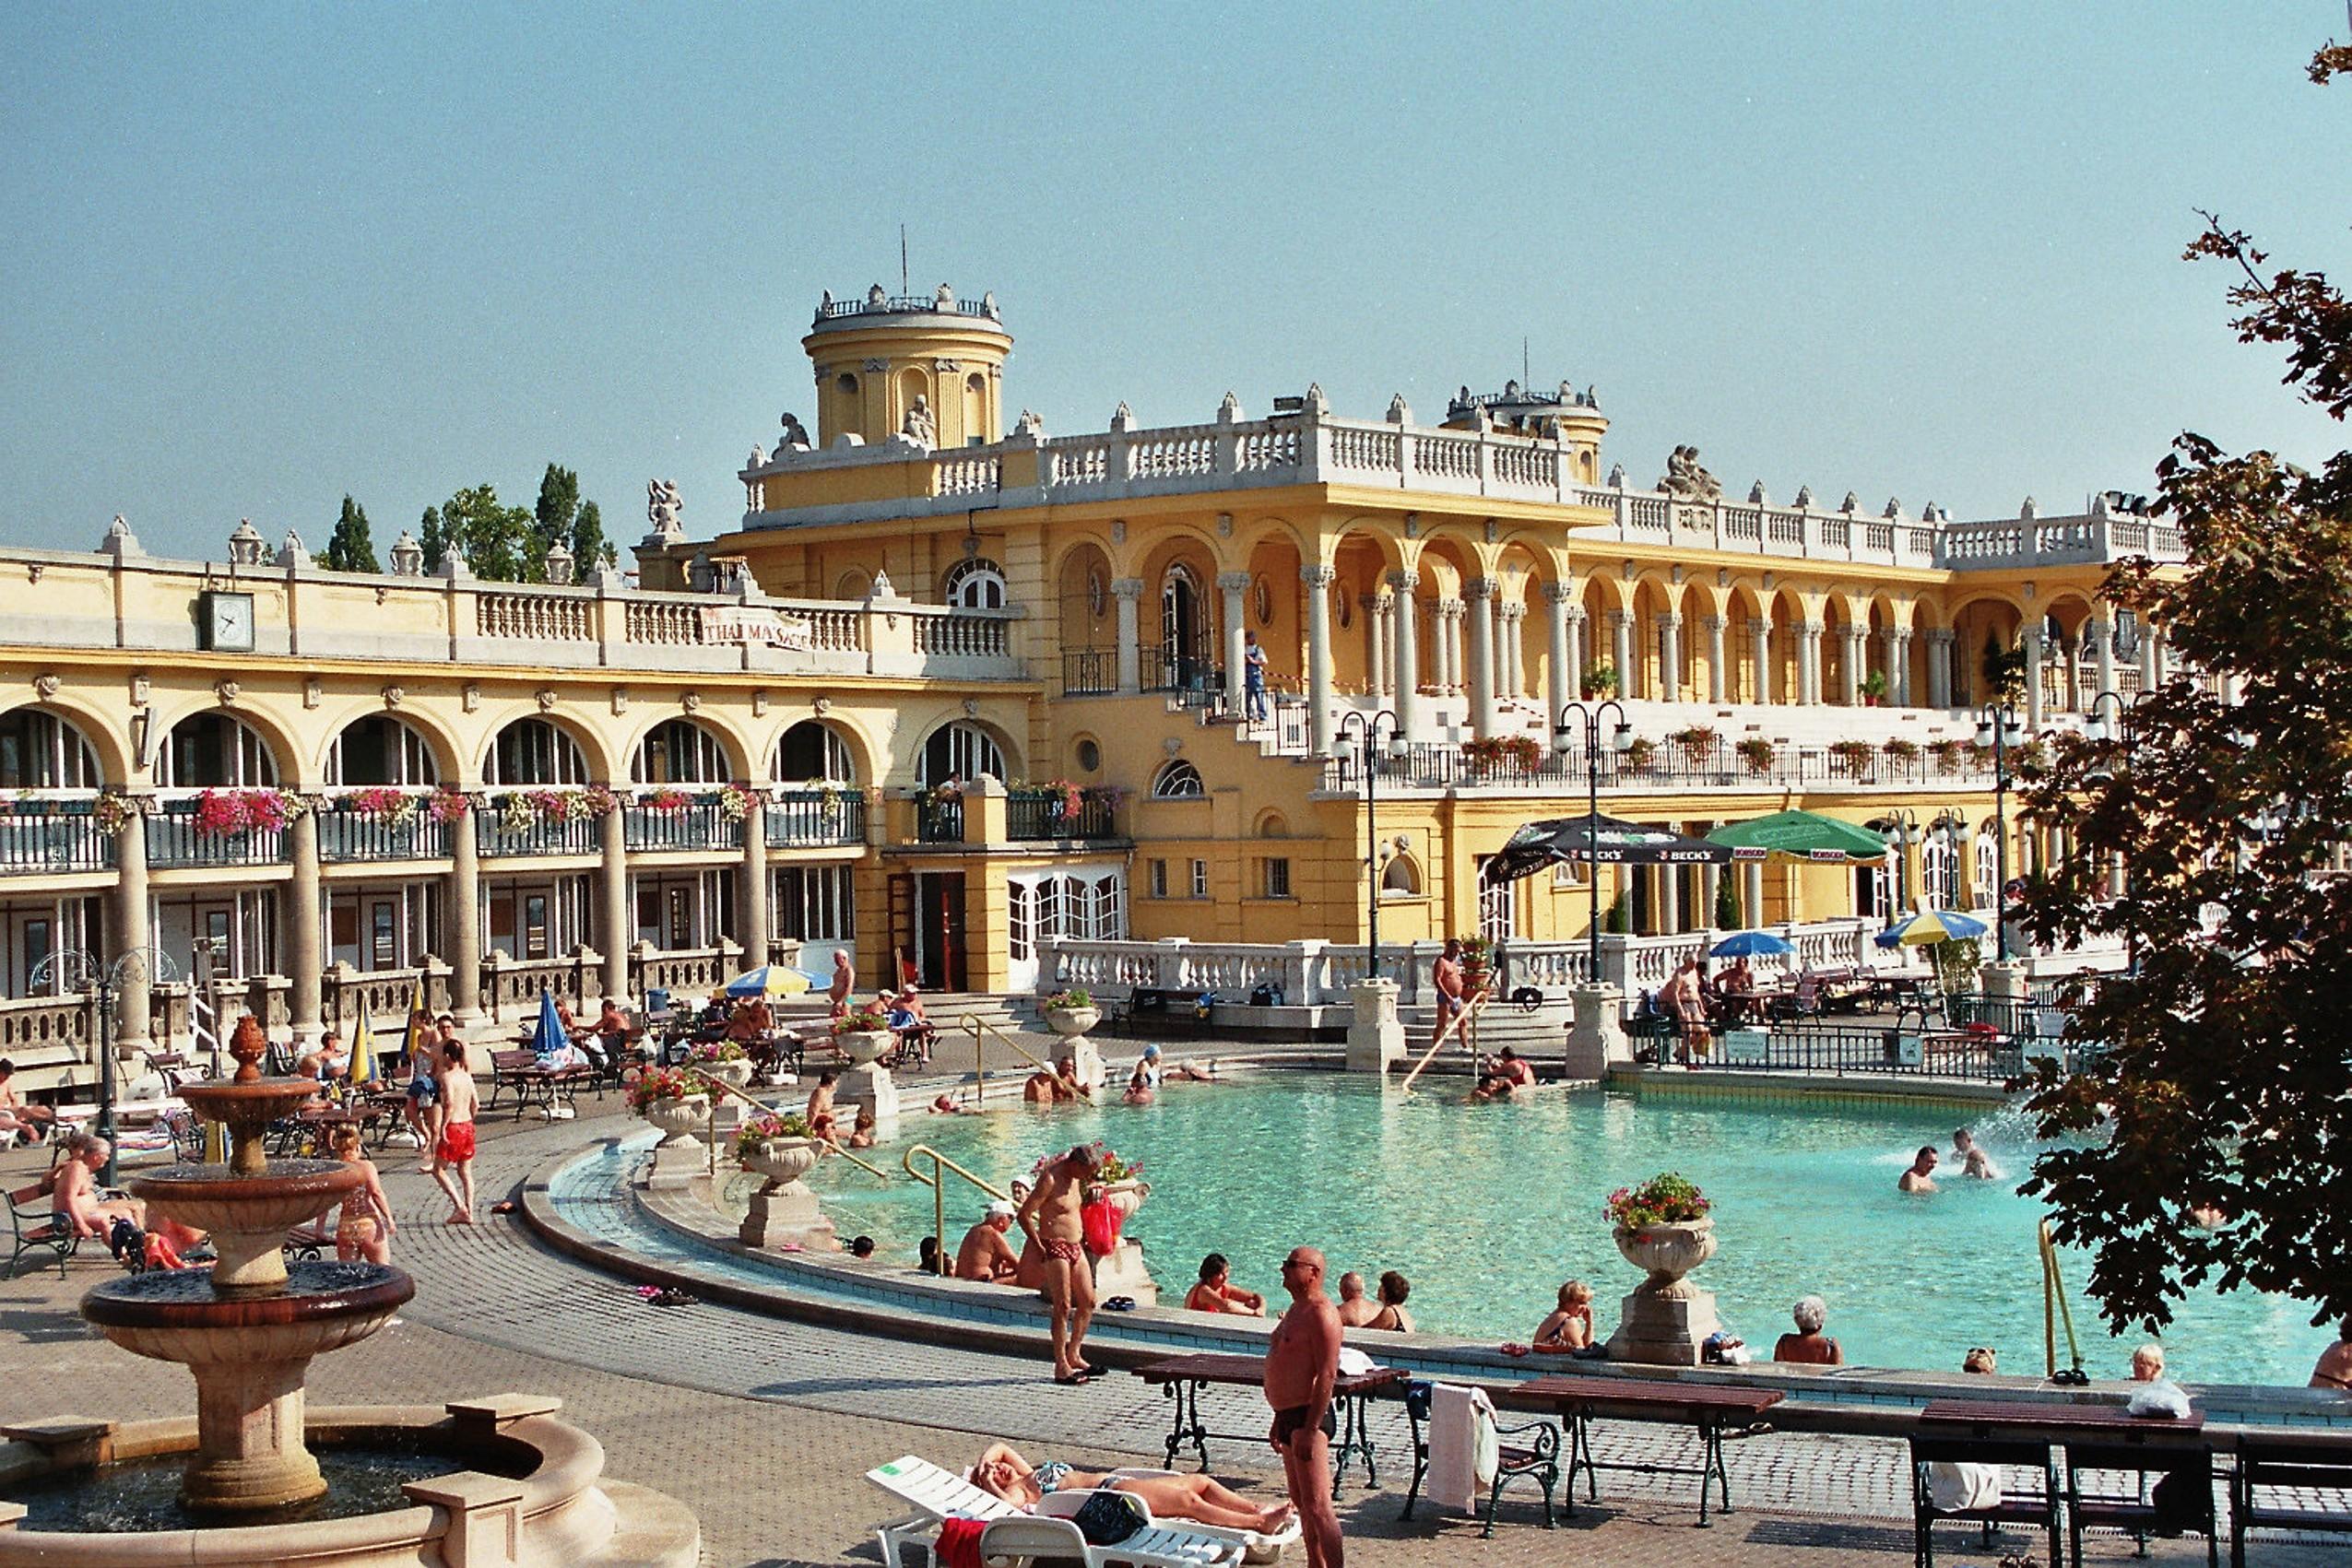 Budapest Baths: Their Economic Influence on the Local Scene